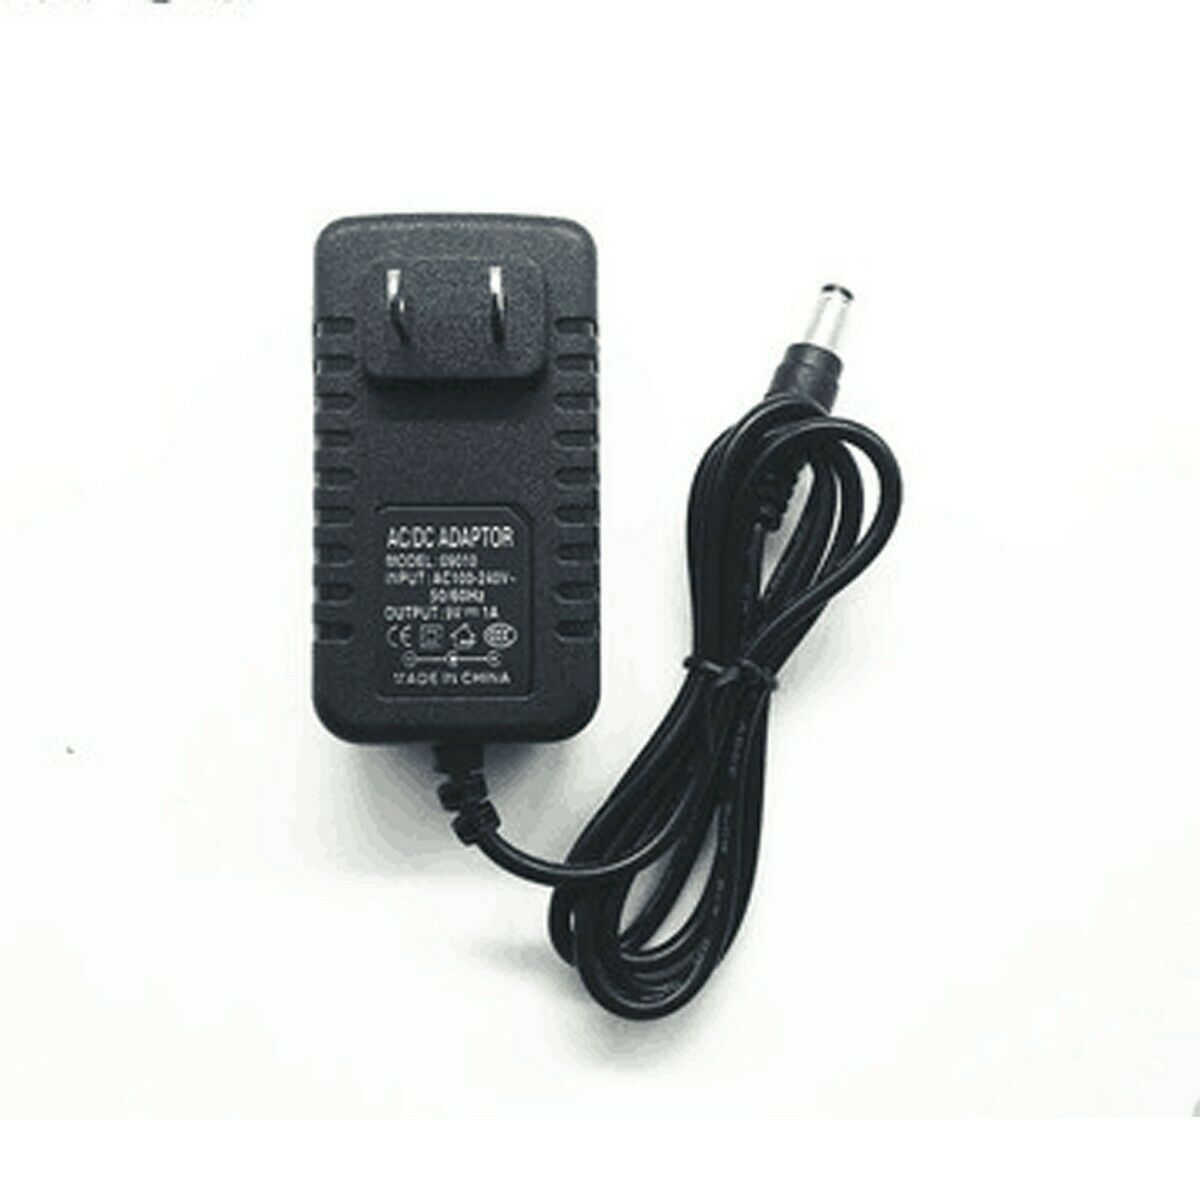 AC - DC Adapter For Honeywell 46-00525 Power Supply MS95XX VOYAGER 1200G 4600525 Brand: Unbranded Type: Adapter Outp - Click Image to Close